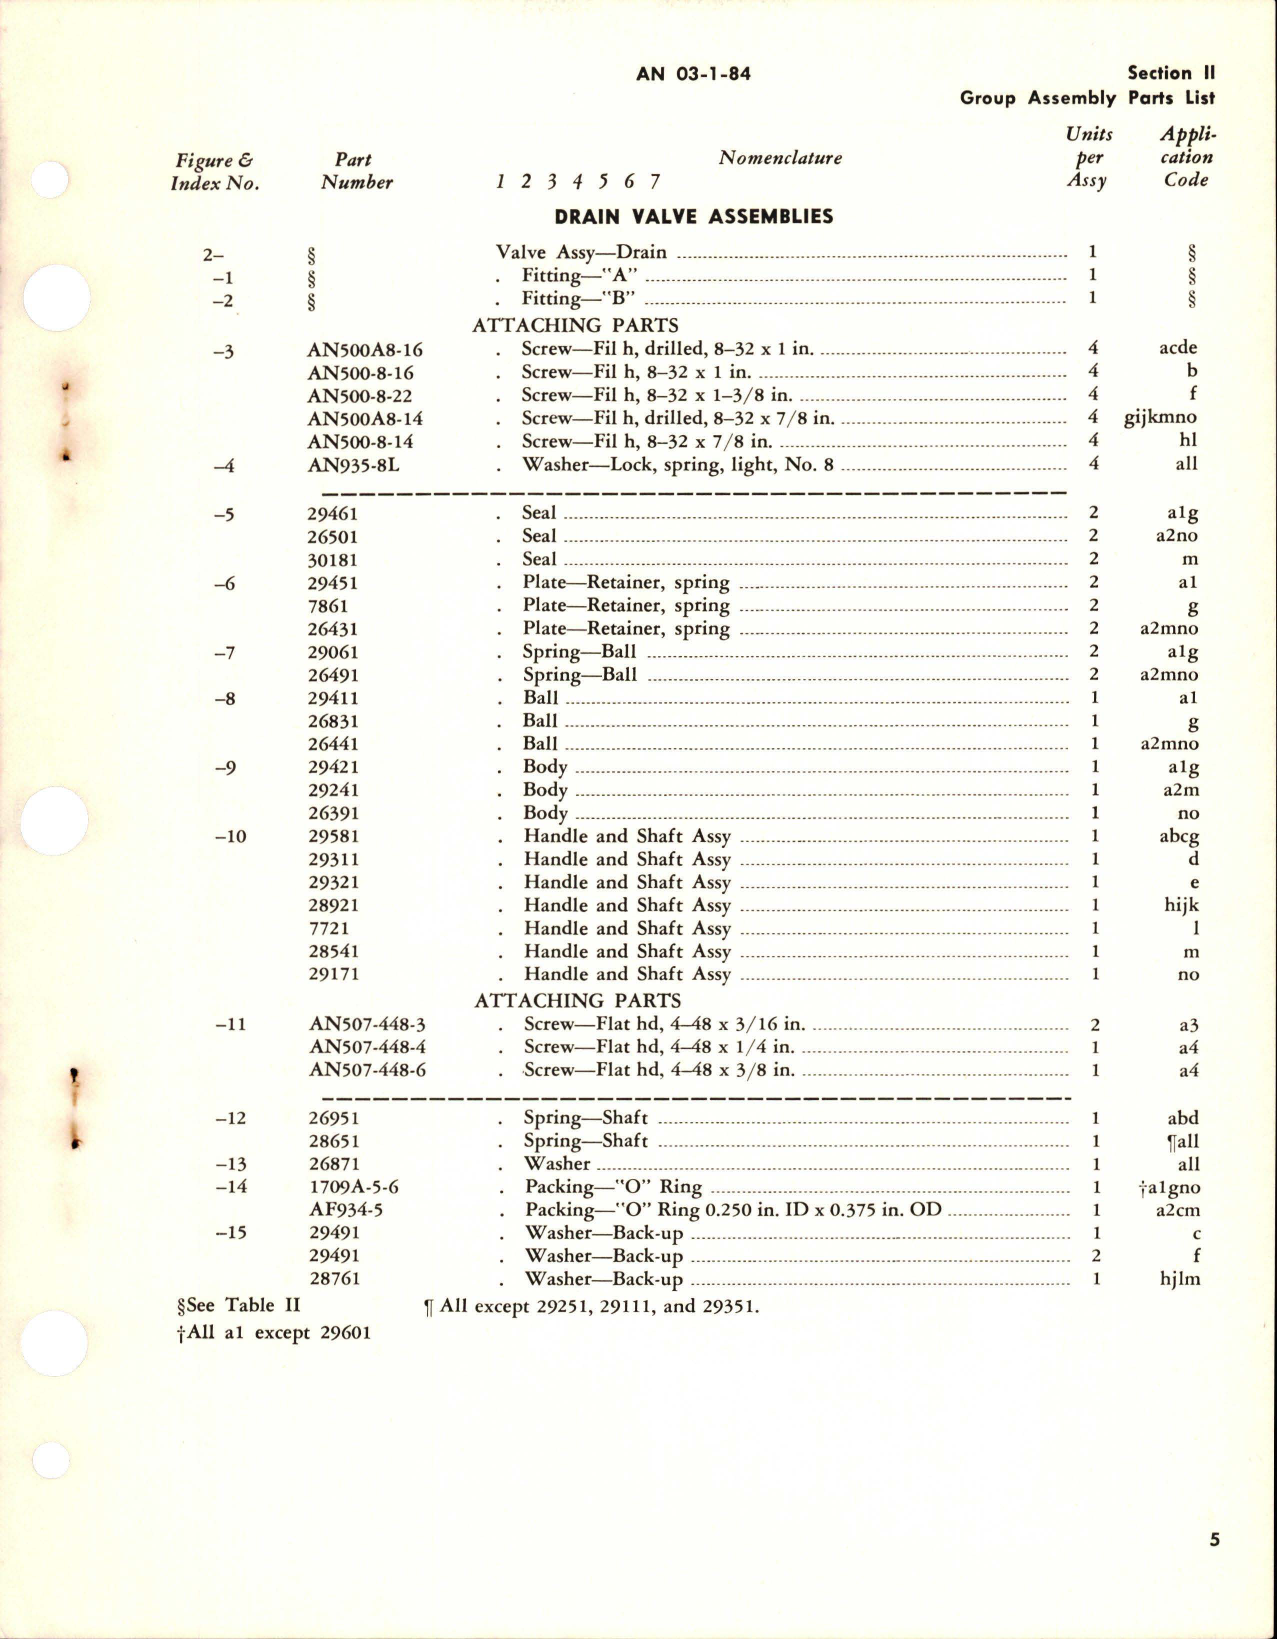 Sample page 7 from AirCorps Library document: Parts Catalog for Ball Type Drain Valves